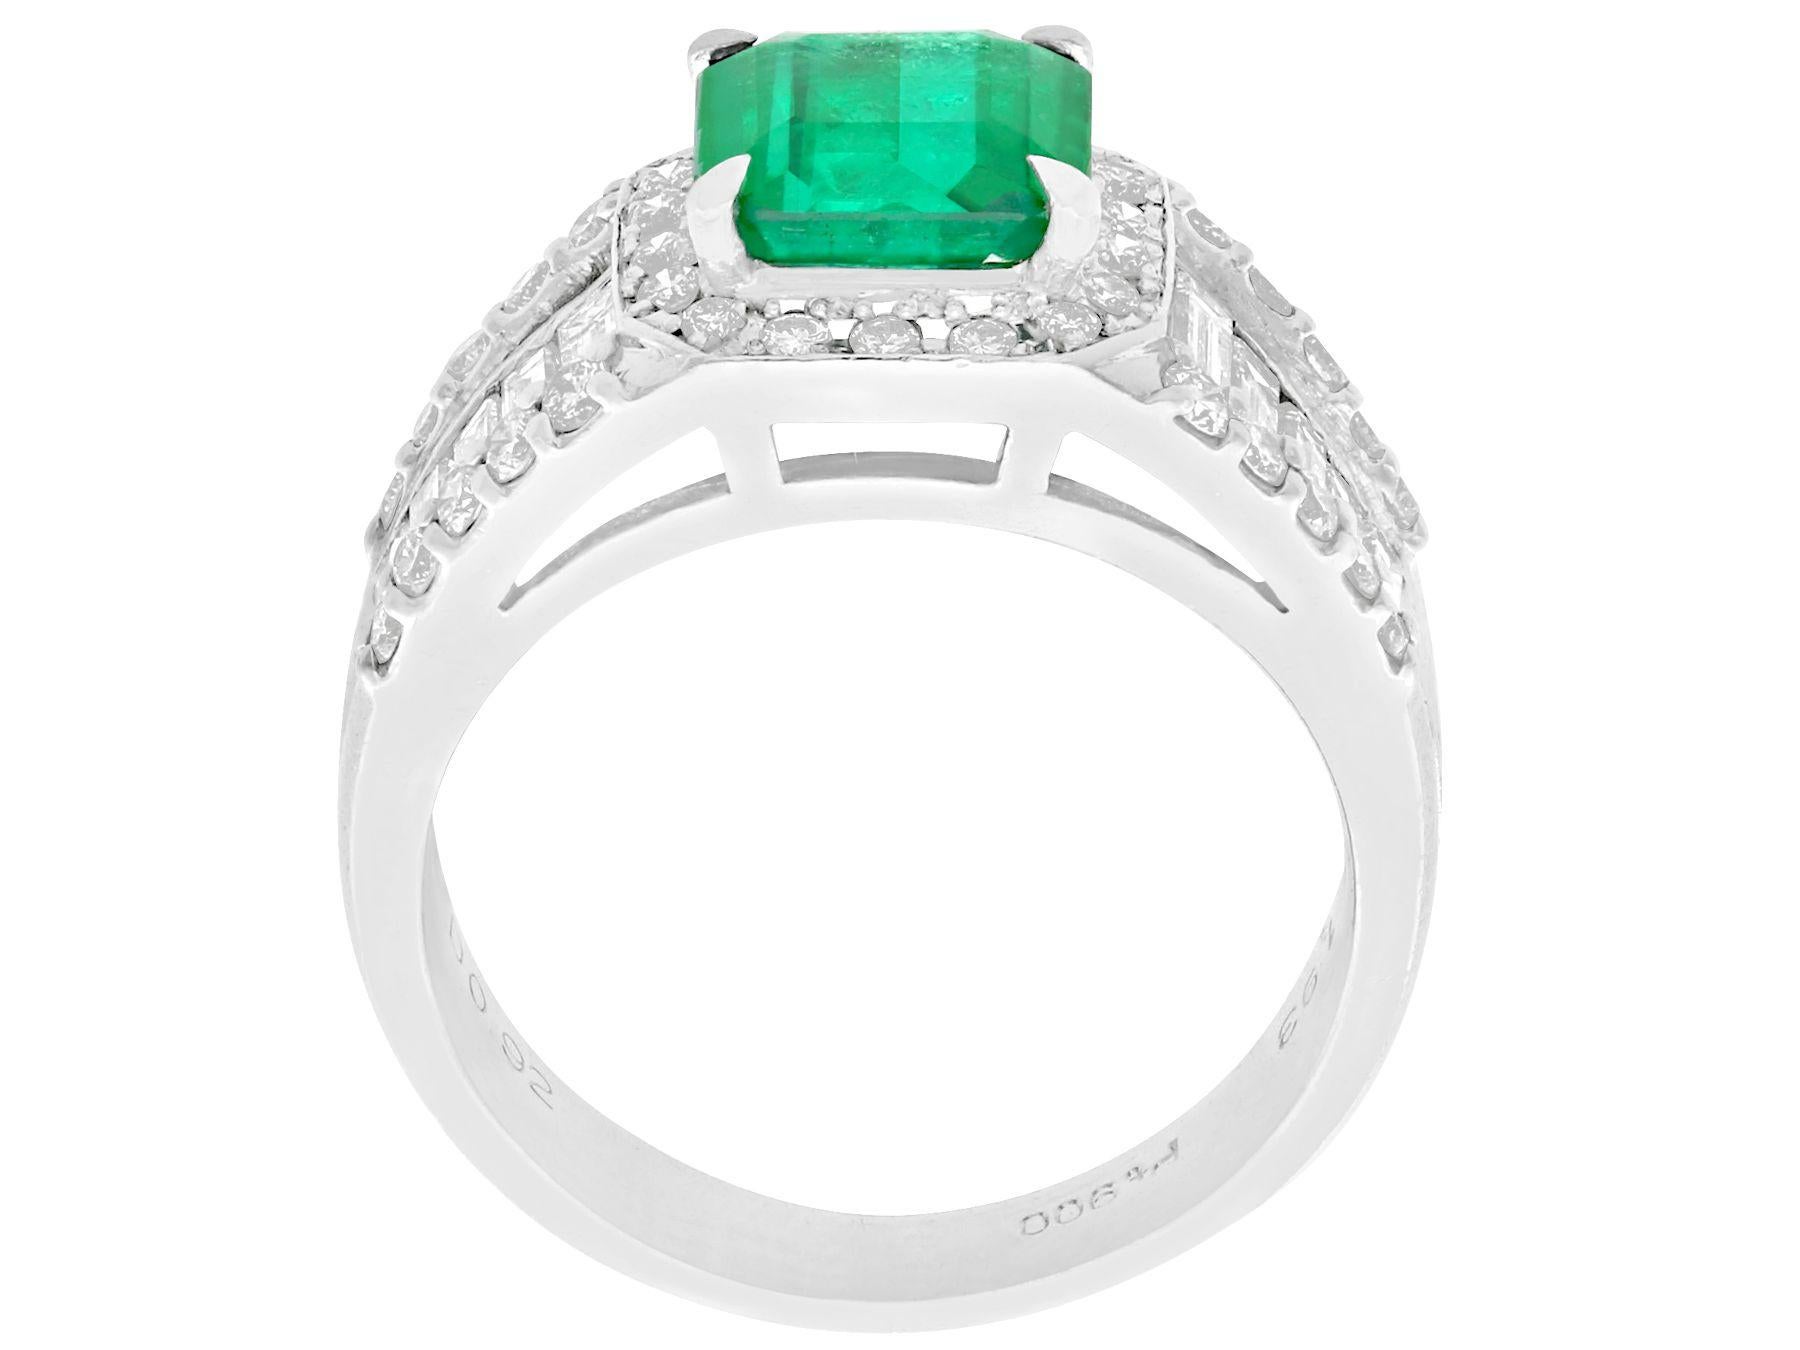 1.93 Carat Emerald and Diamond Platinum Cocktail Ring In Excellent Condition For Sale In Jesmond, Newcastle Upon Tyne